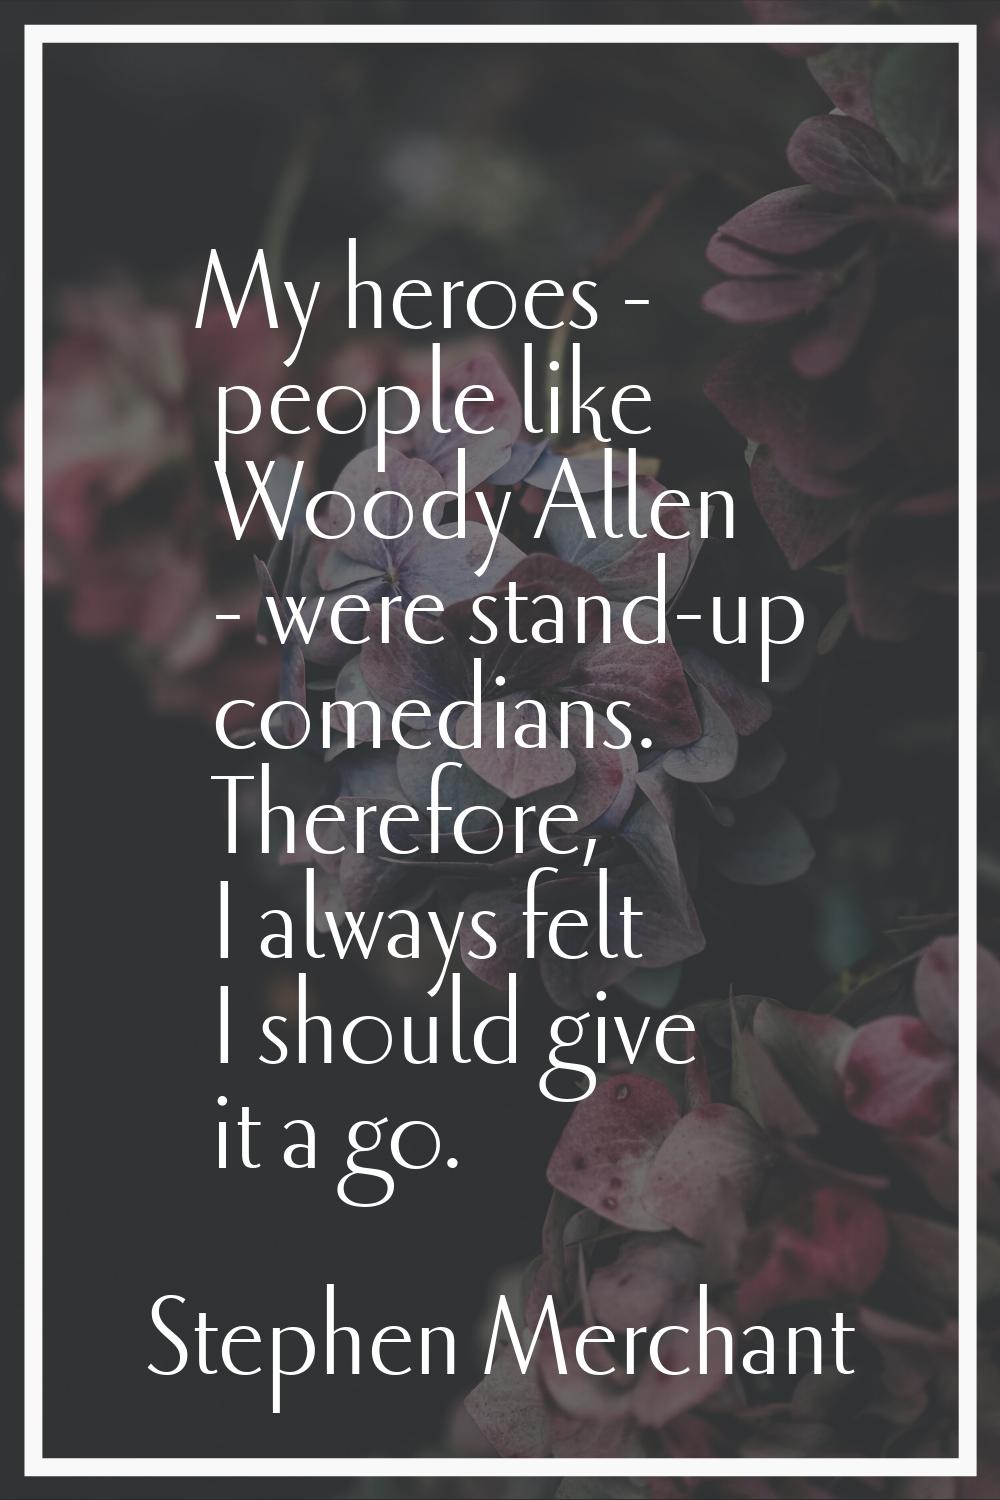 My heroes - people like Woody Allen - were stand-up comedians. Therefore, I always felt I should gi